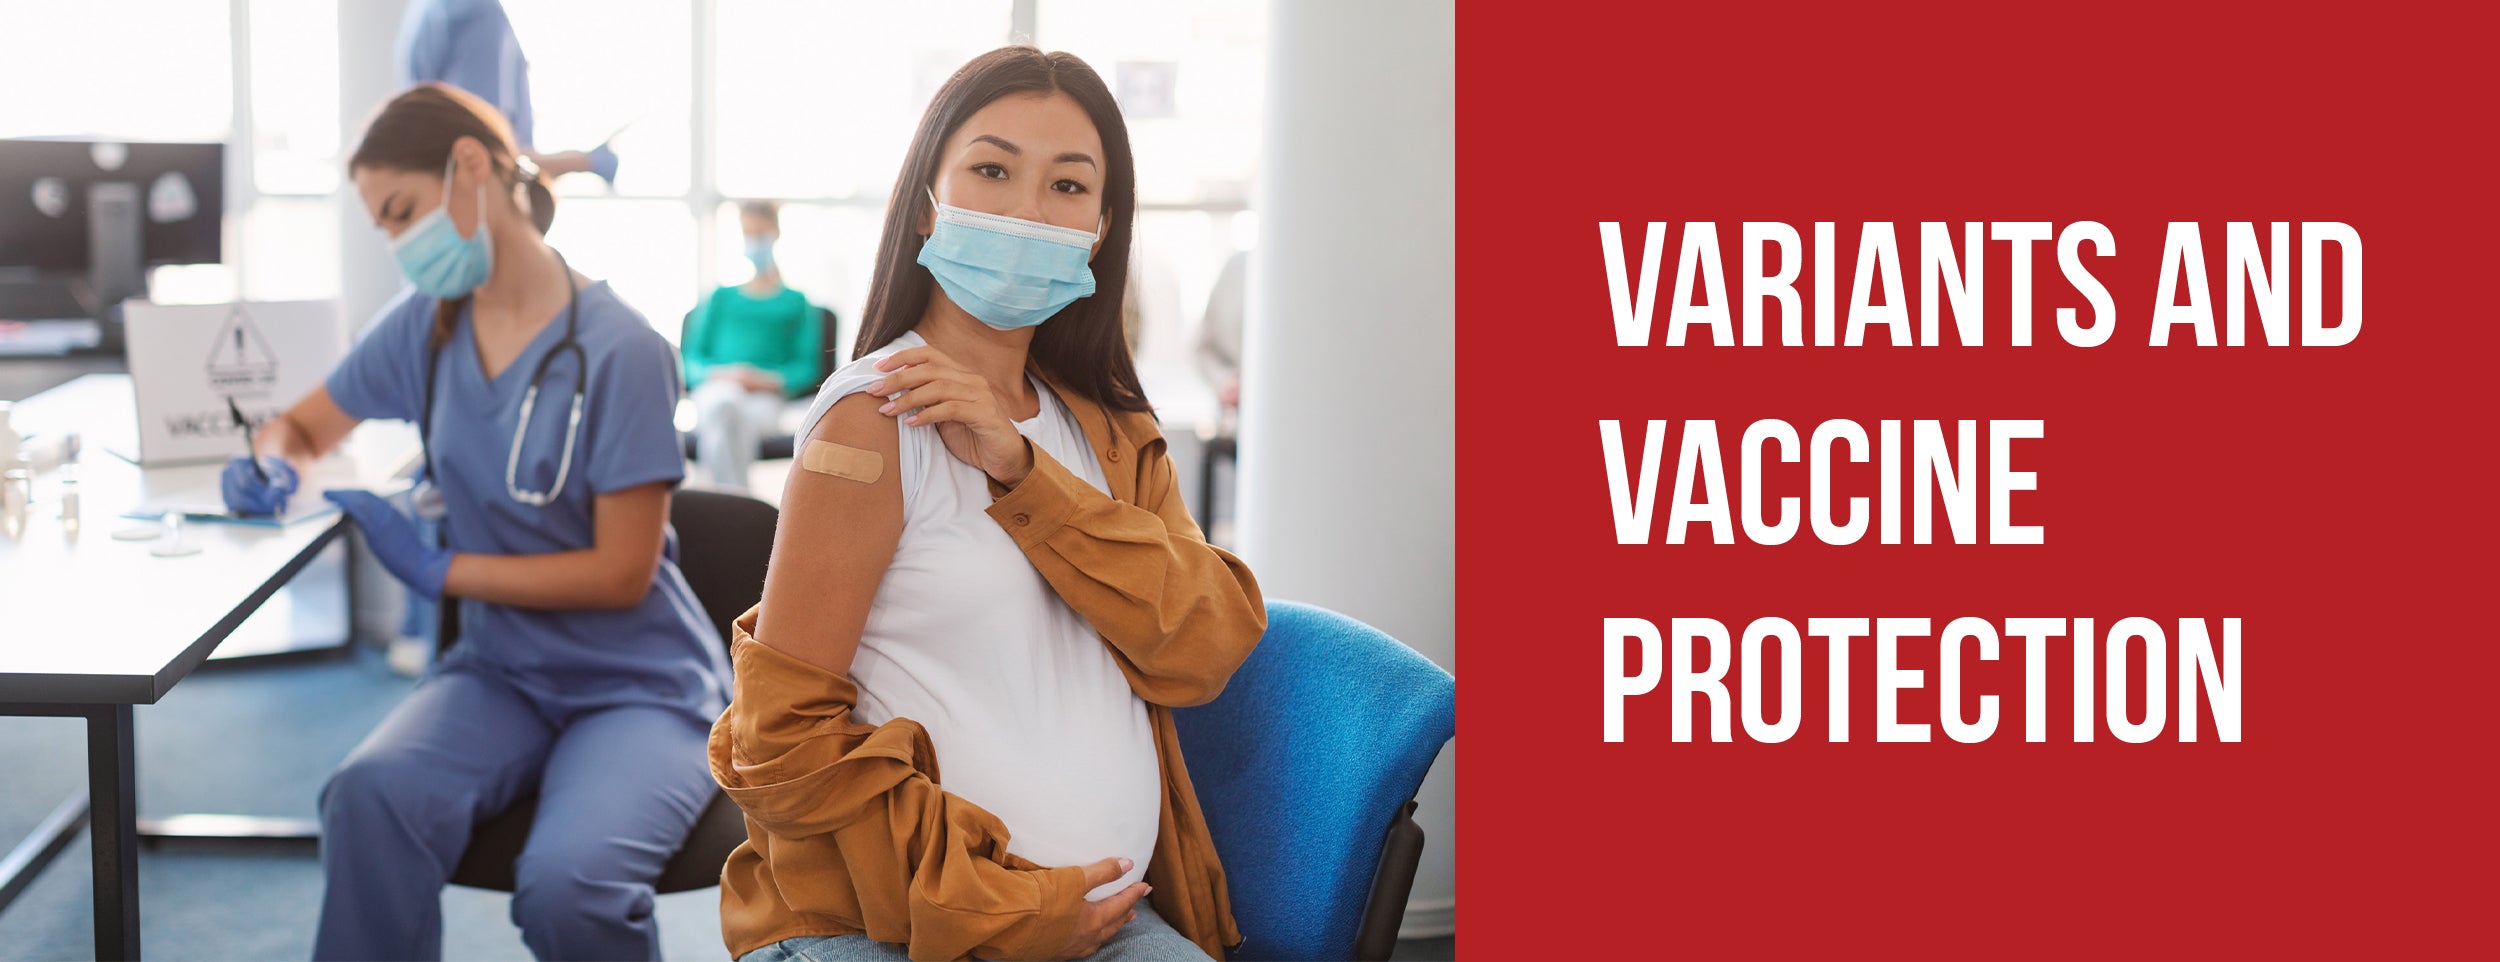 Protection from vaccines and variants